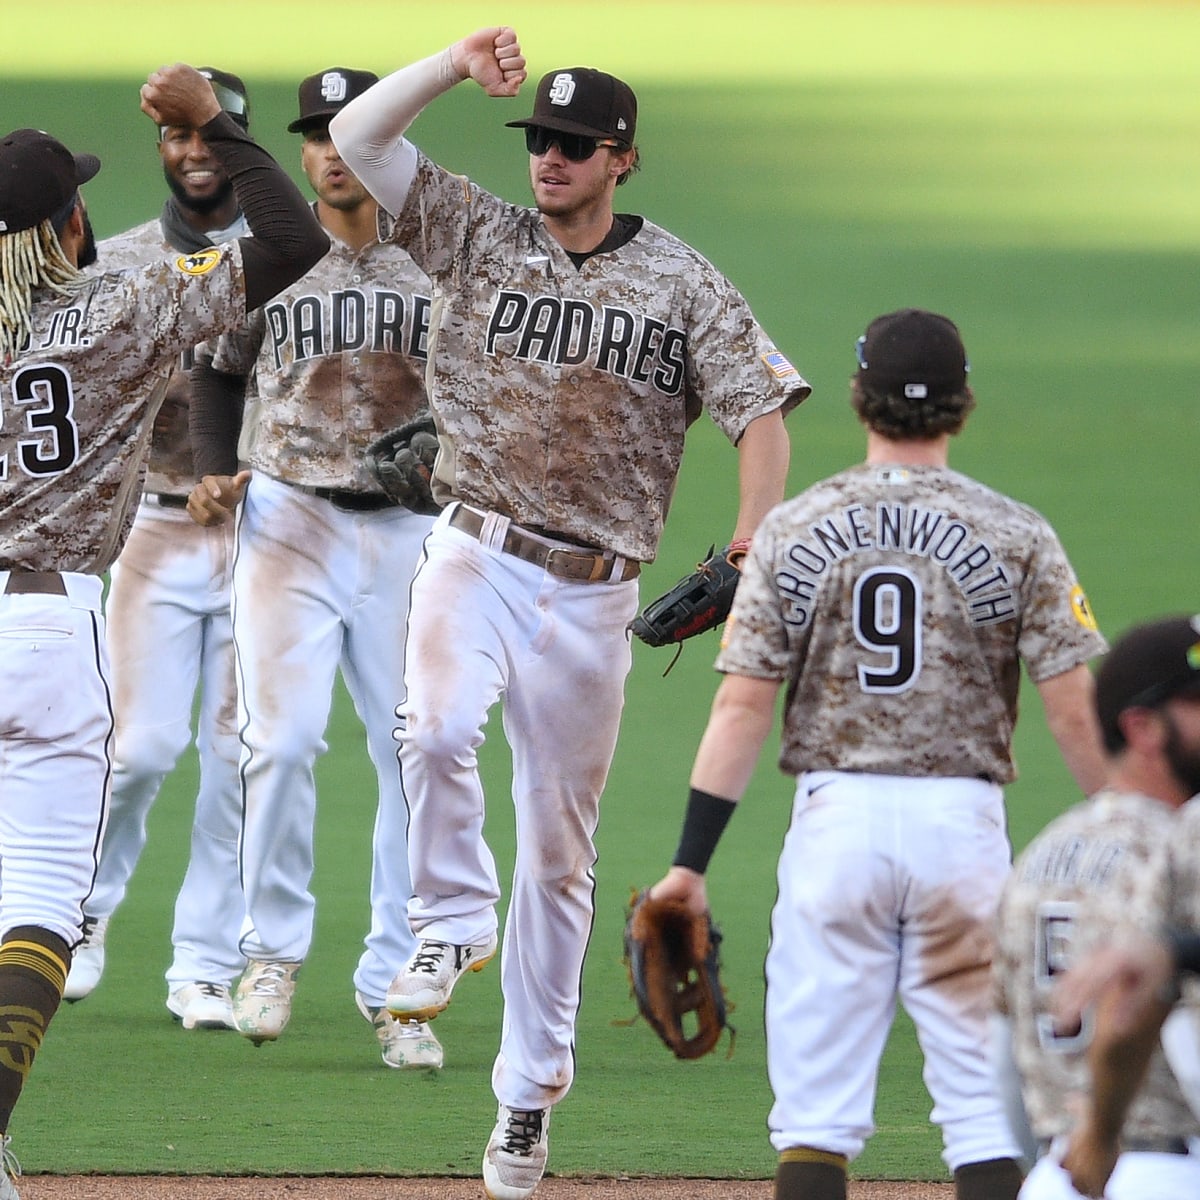 San Diego Padres clinch first playoff spot since 2006 - Sports